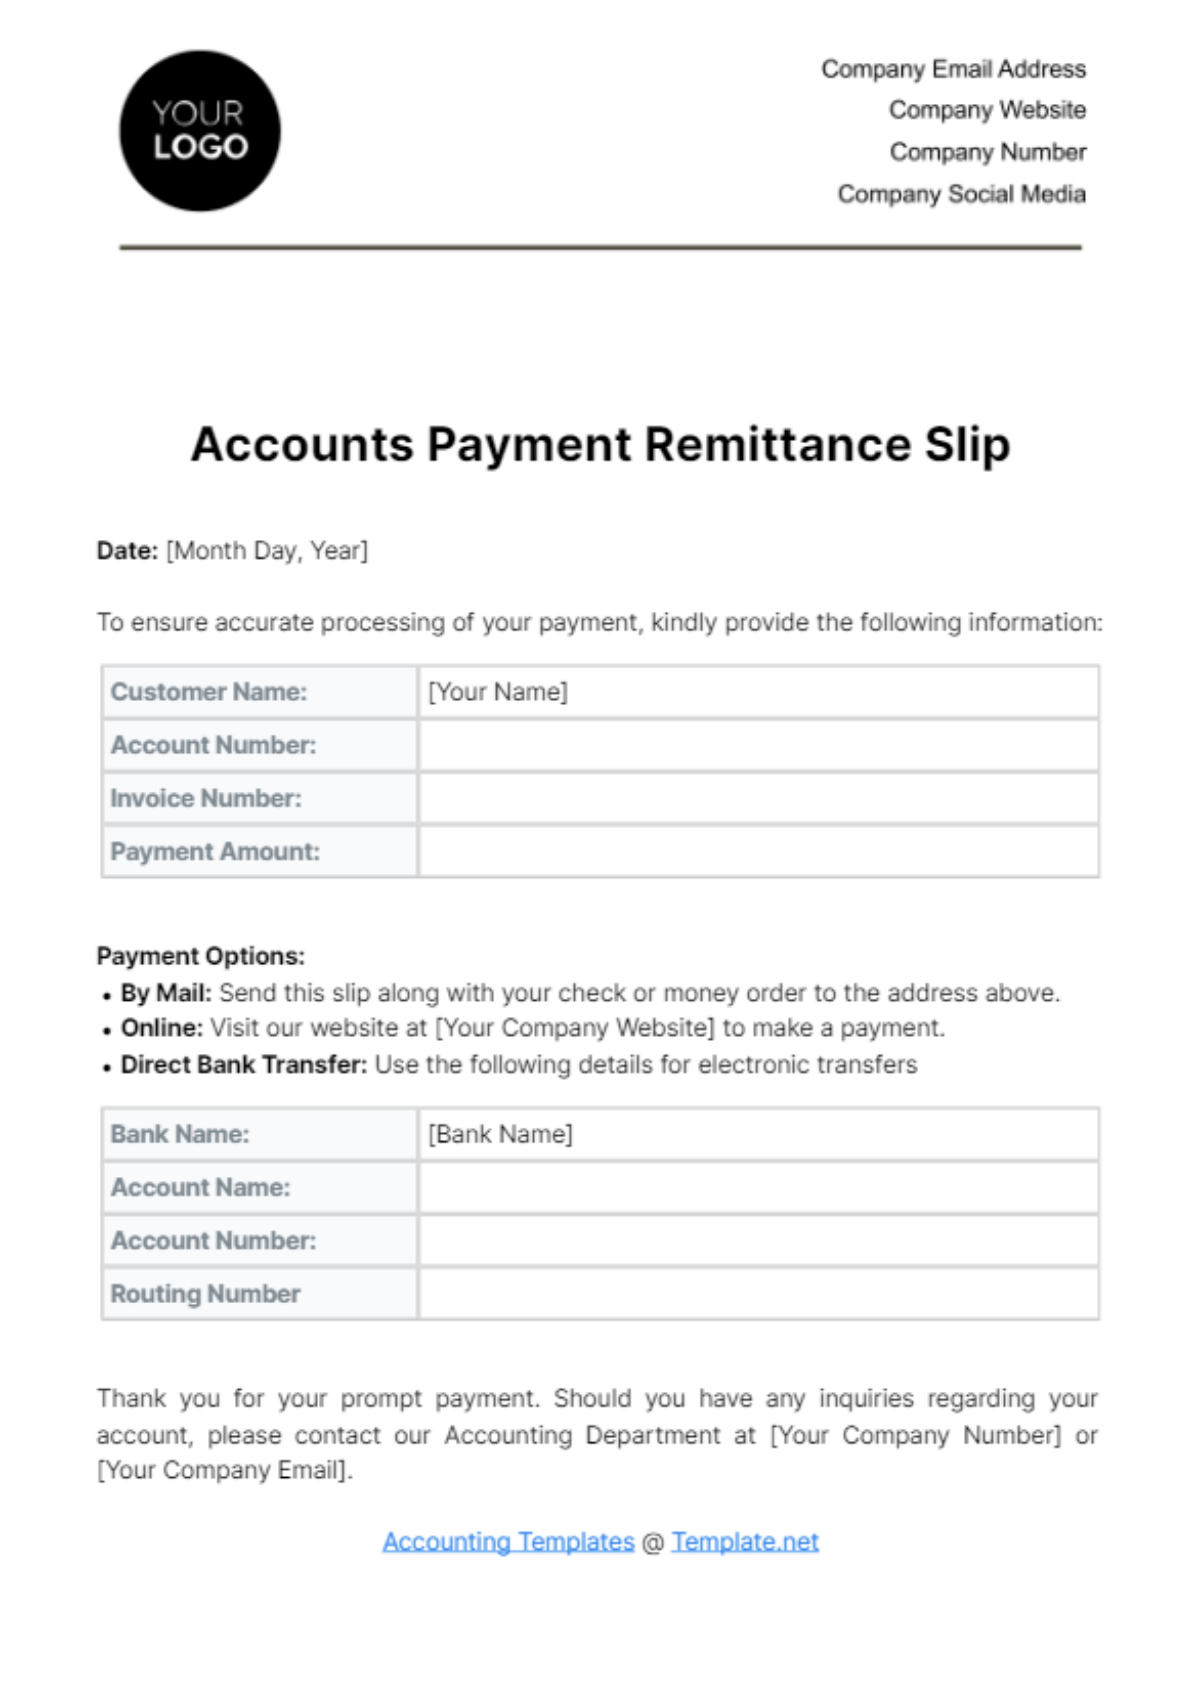 Accounts Payment Remittance Slip Template